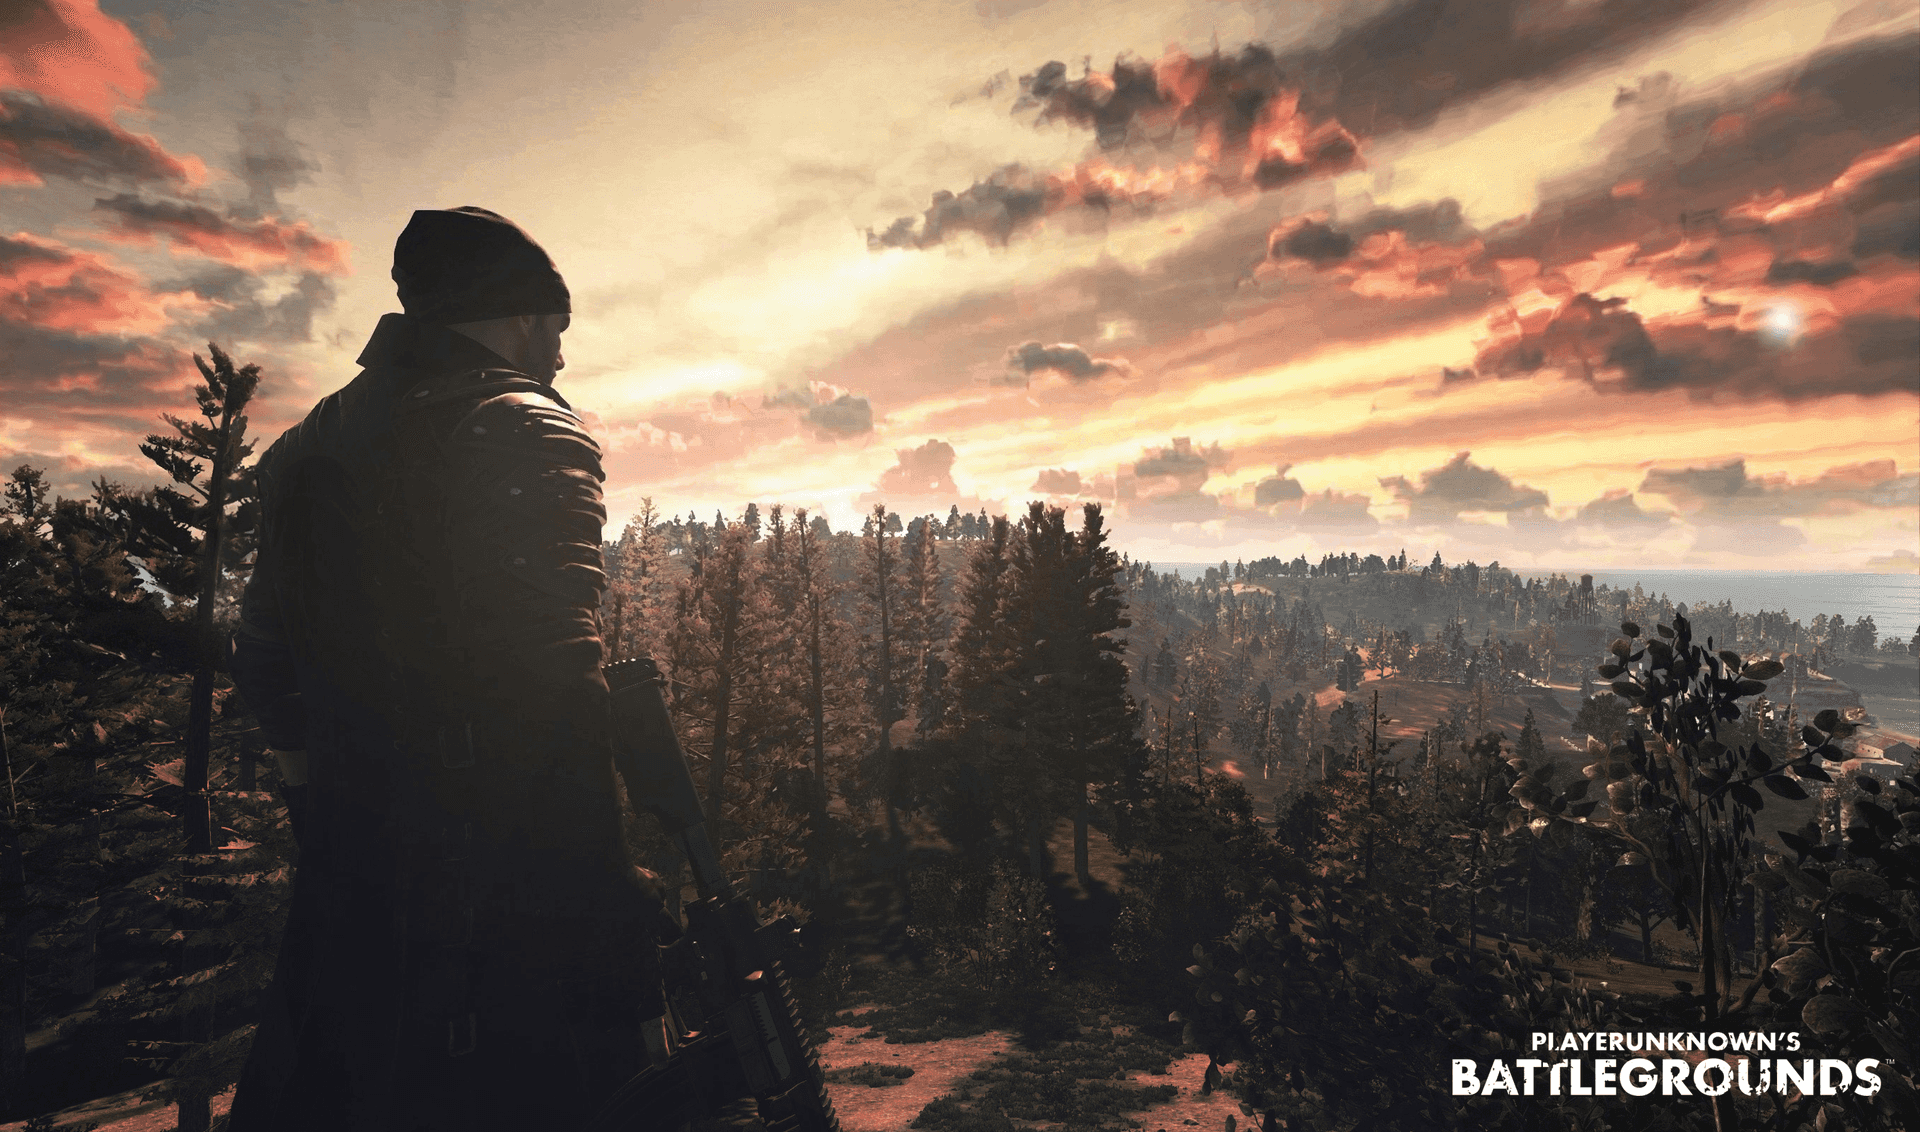 PlayerUnknown's Battlegrounds: Outlasting Your Enemies.